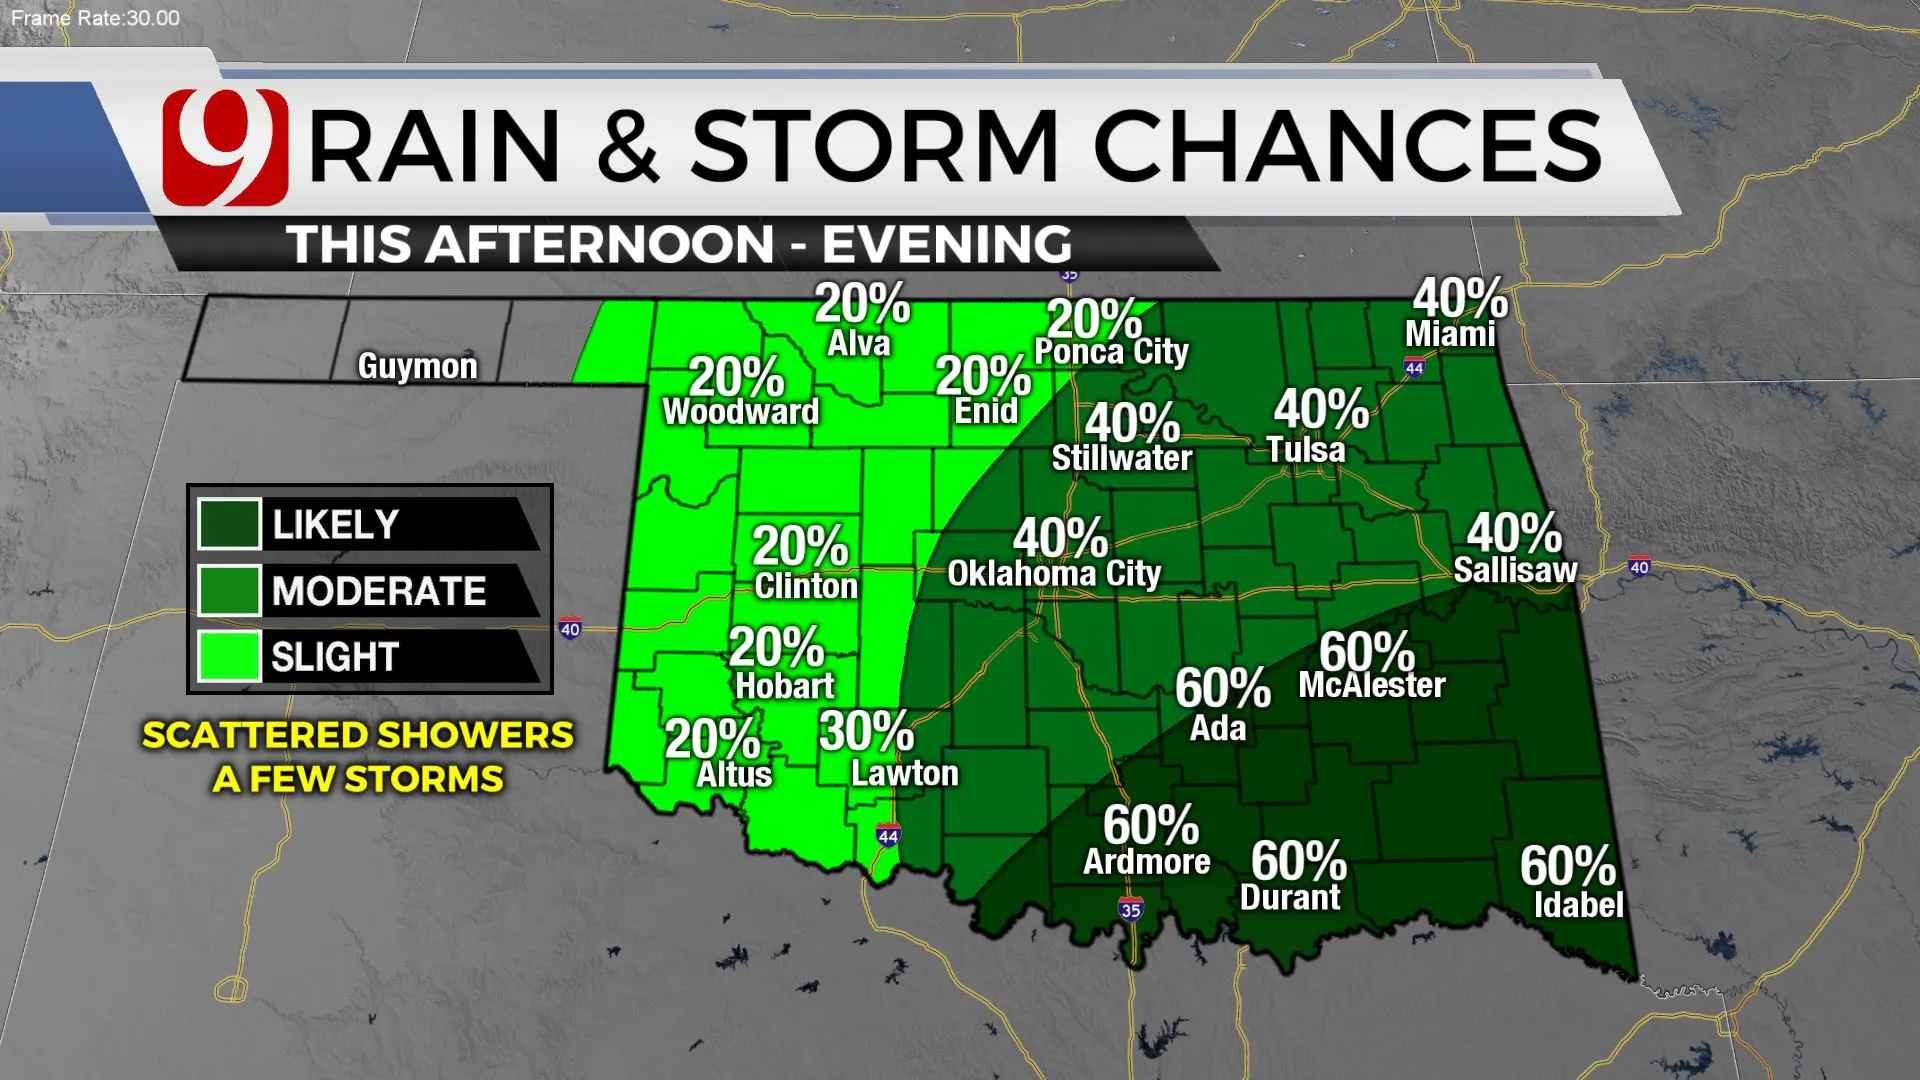 Rain and storm chances Thursday afternoon.